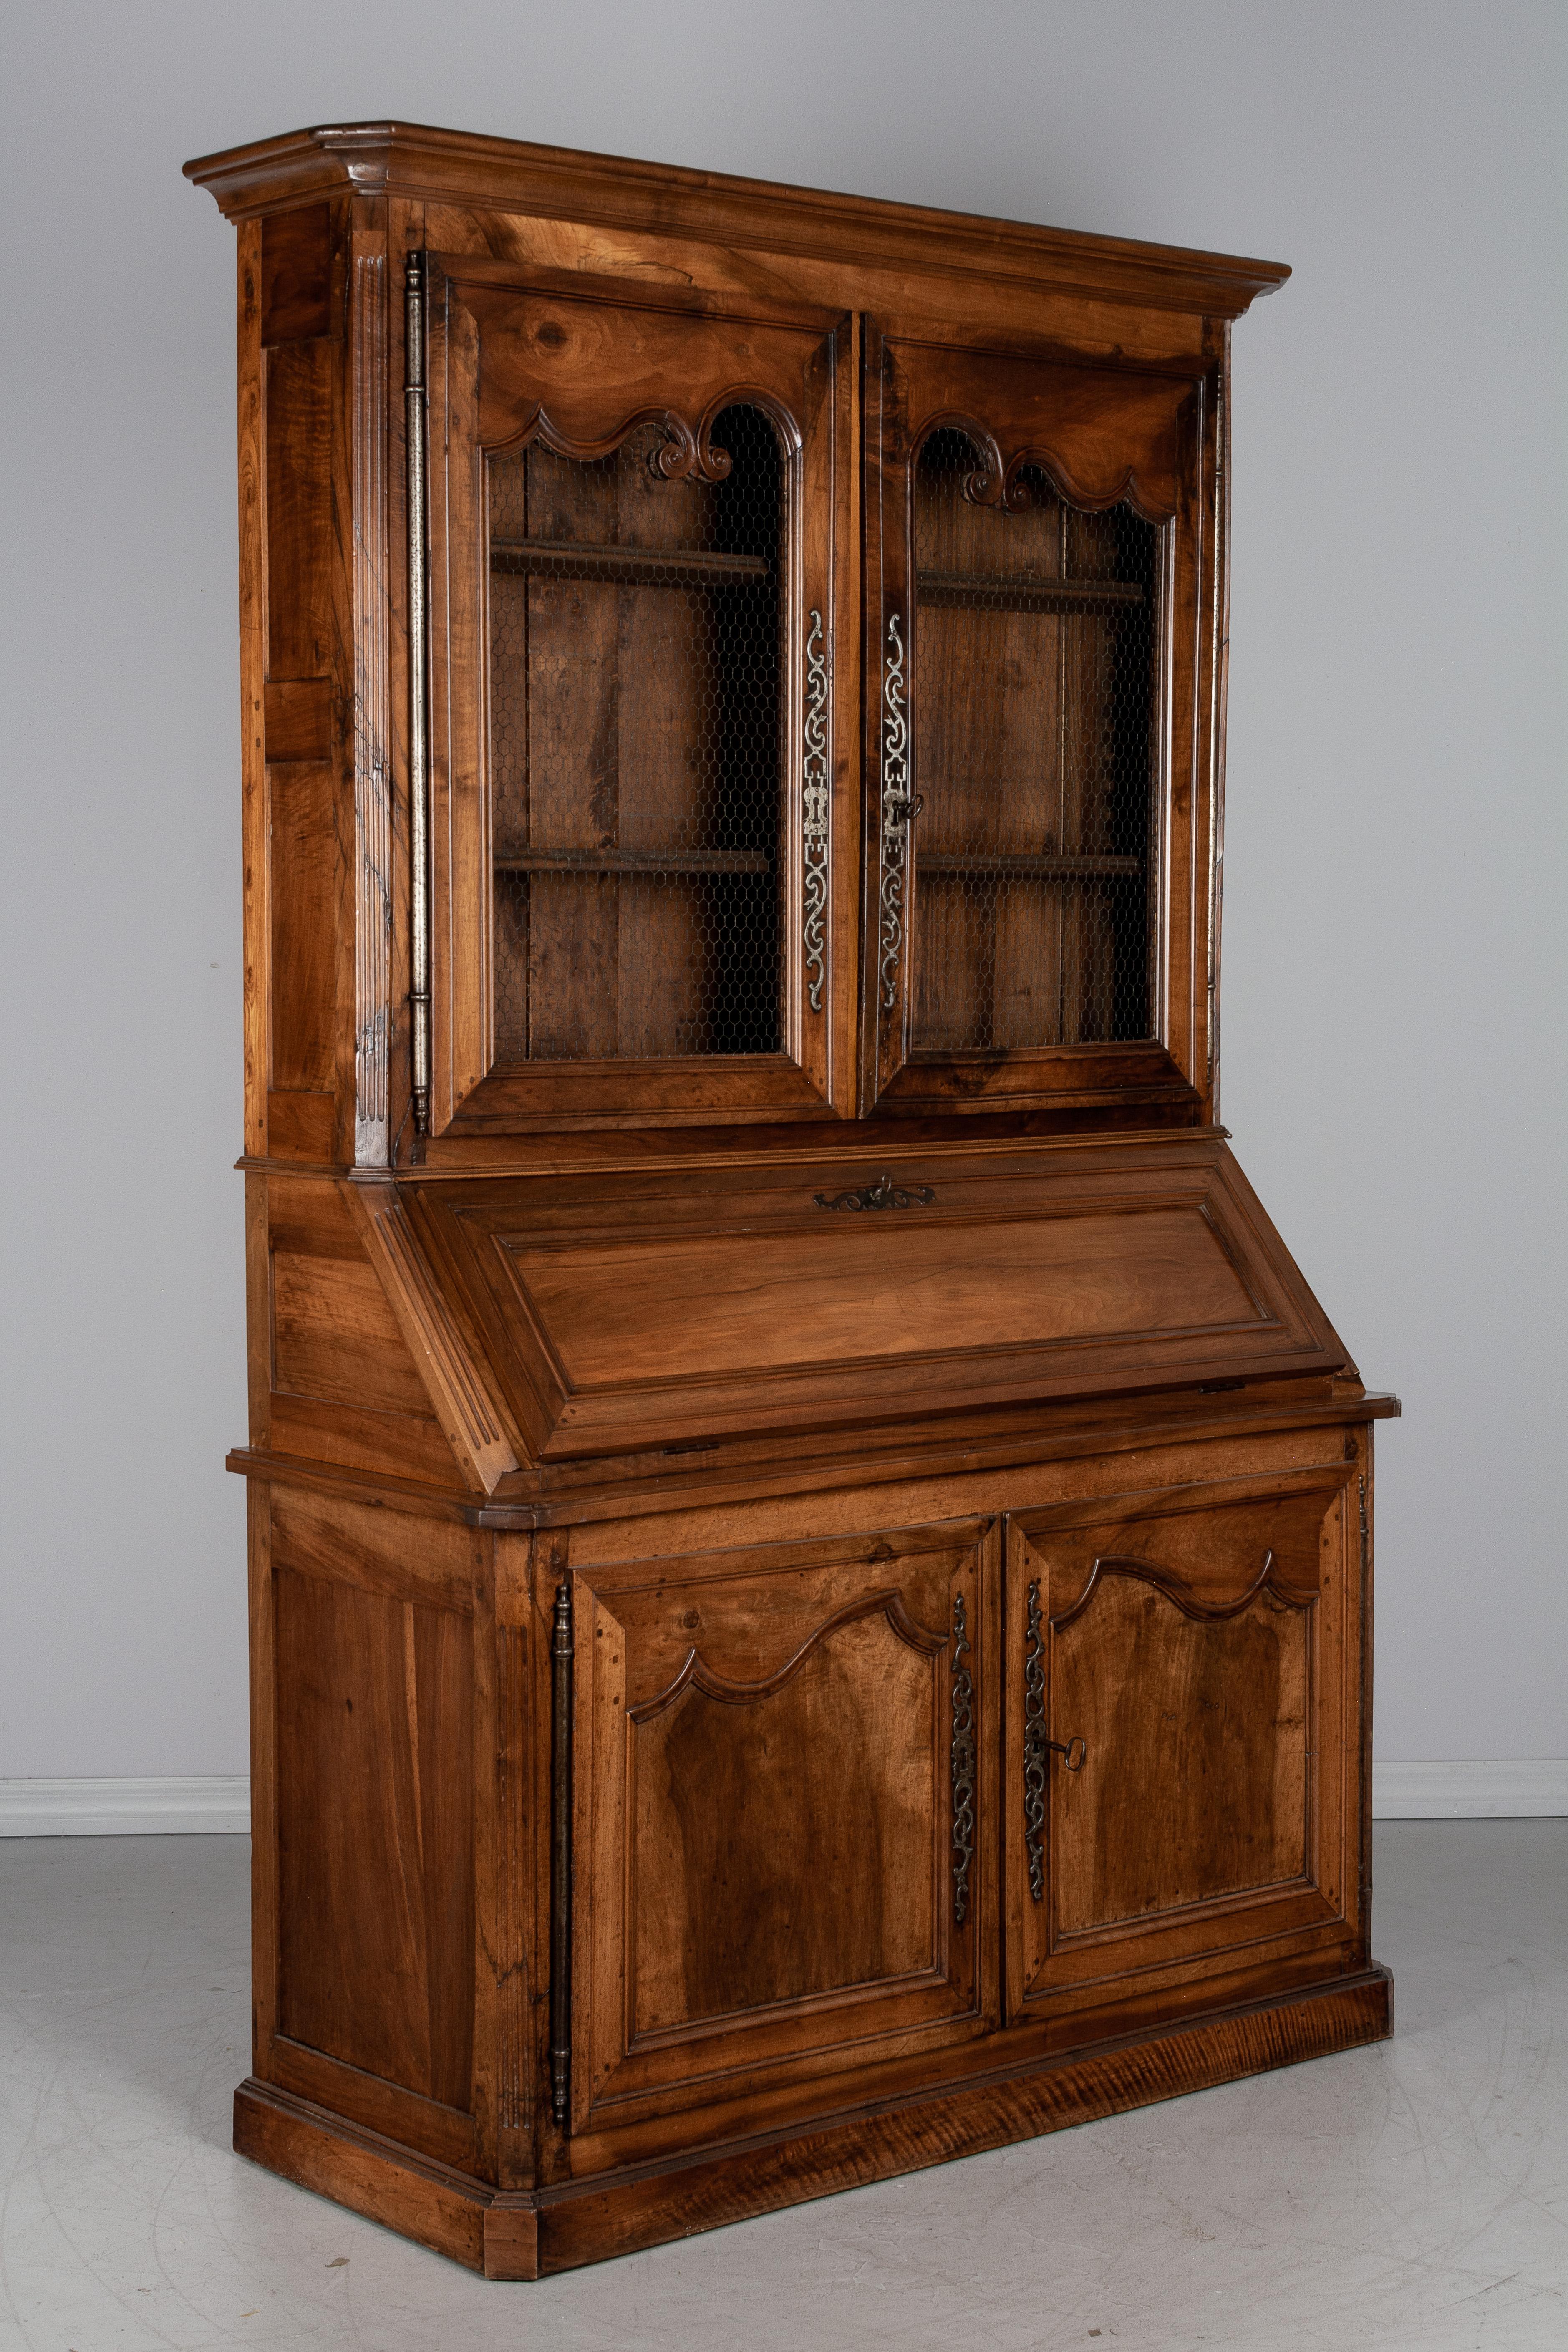 An exceptional 19th century French Louis XV style scriban, or secretary, from the Loire Valley, made of solid walnut with pegged construction and mortise and tenon joints. The abbattant, or slant front desk, hinges open to reveal a leather writing